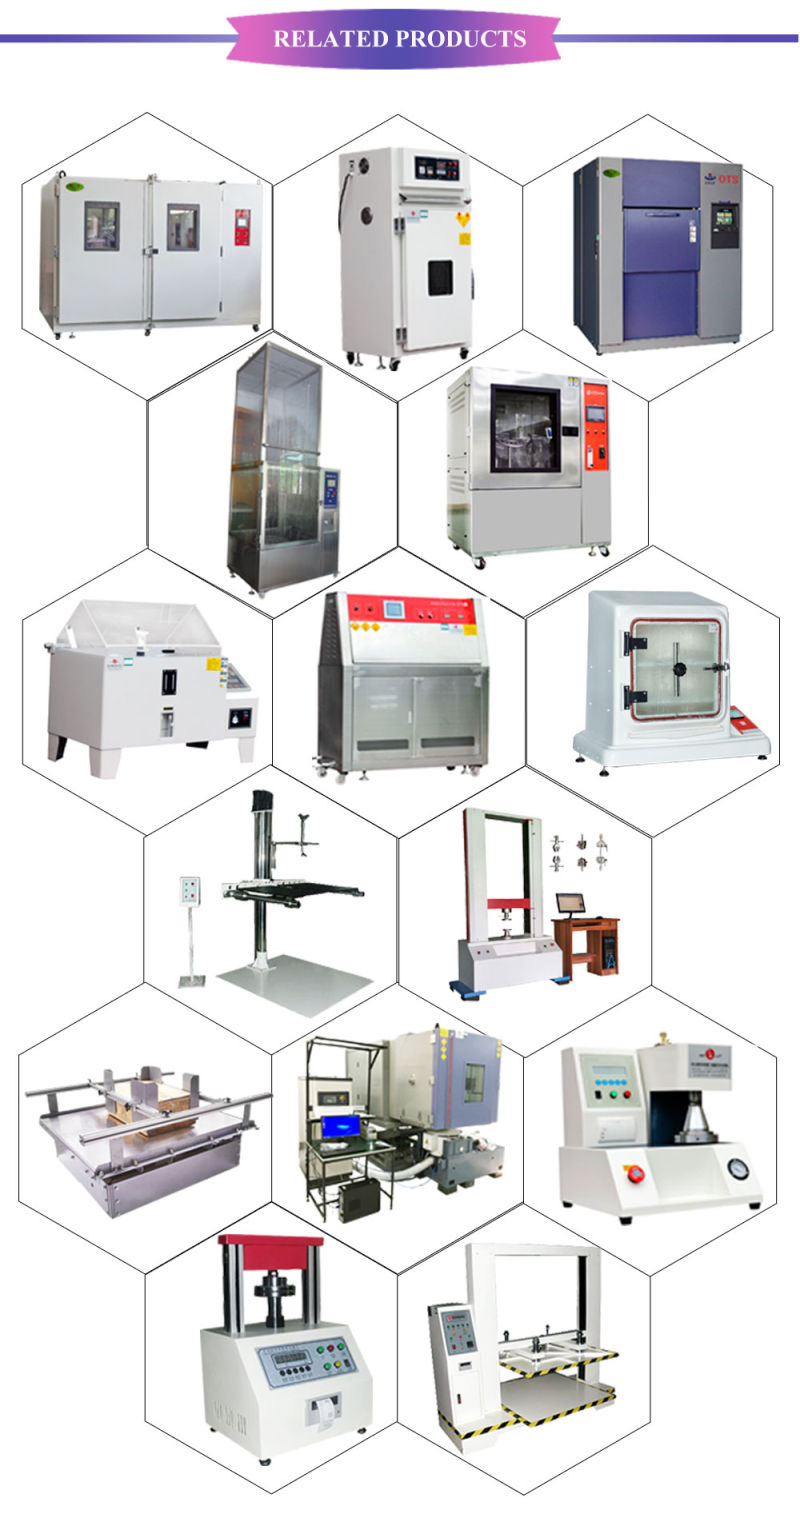 Fast Change Rate Environmental Test Chamber